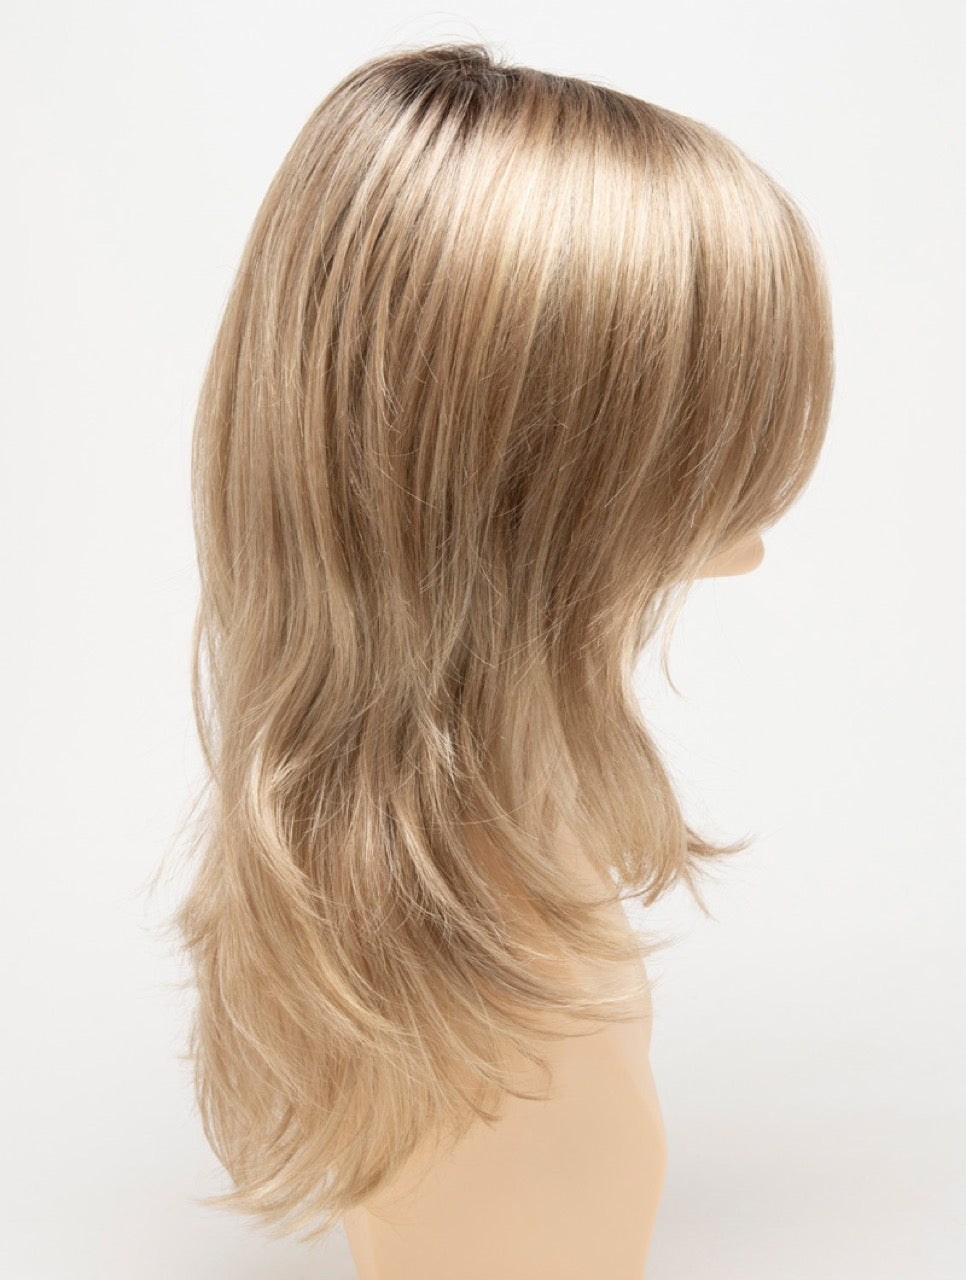 Champagne Shadow | 14/613 R8 | Rooted Pale Golden Blonde